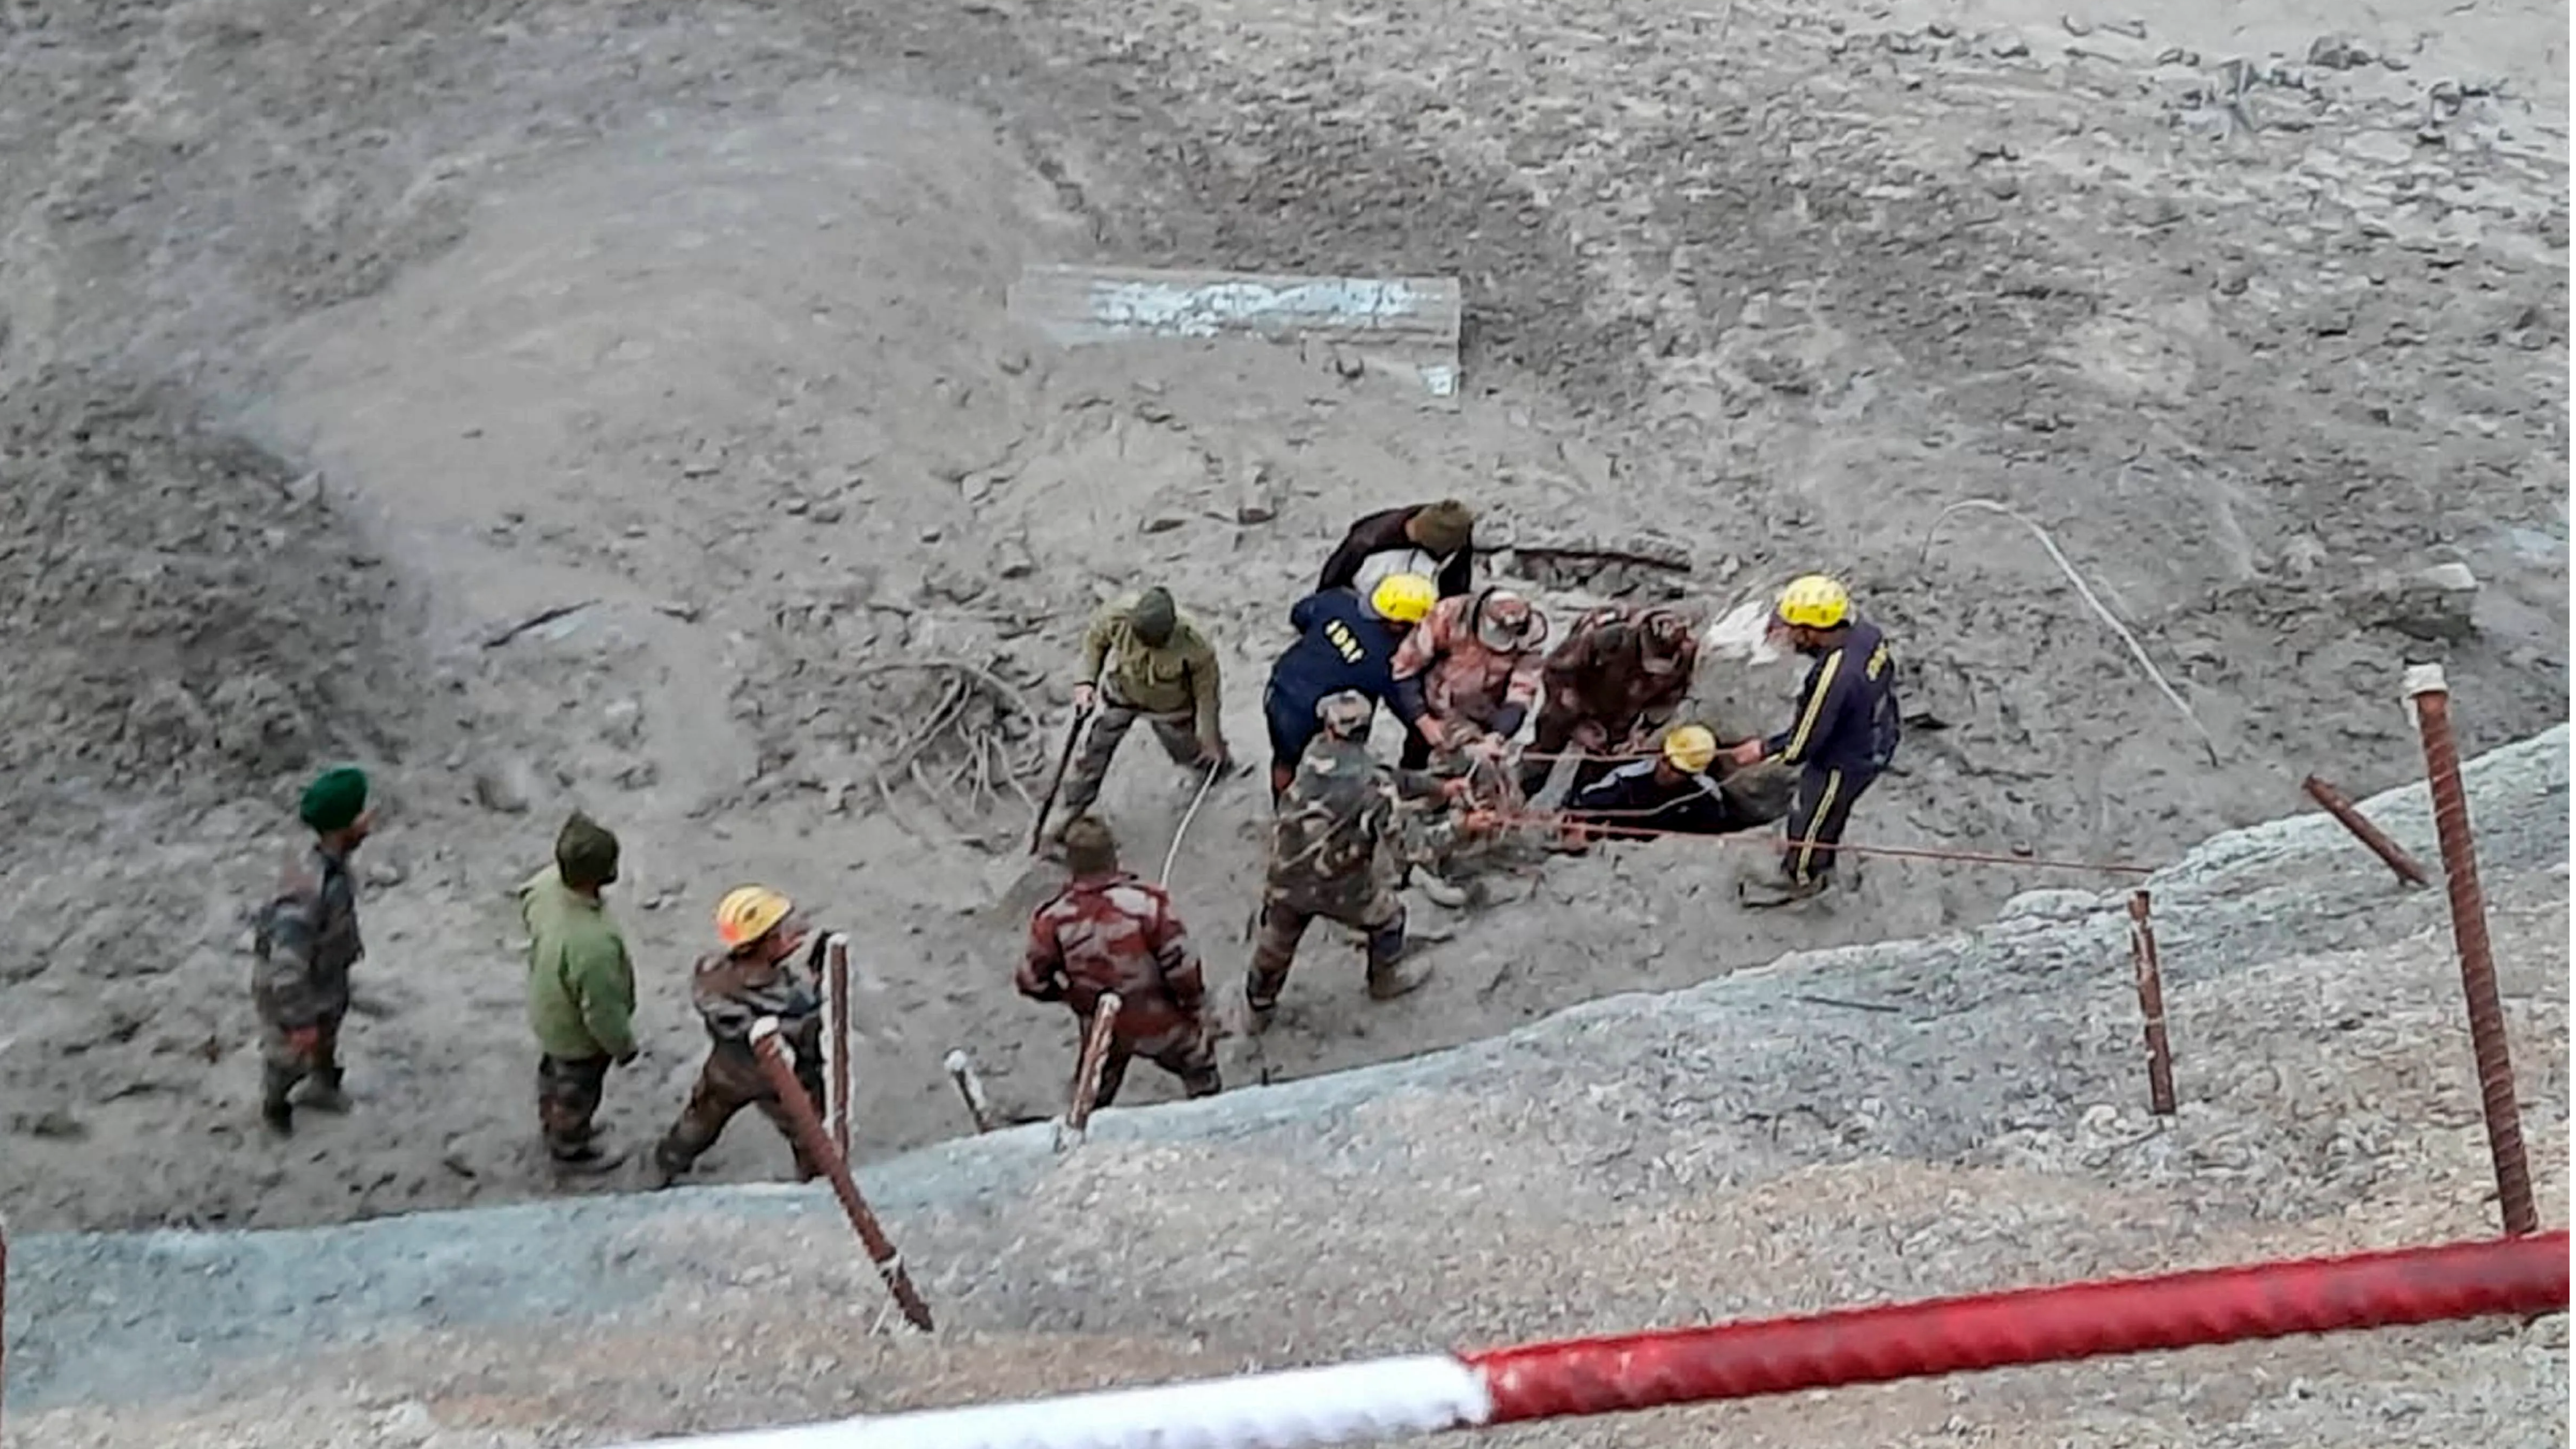 Uttarakhand glacier breach: 26 bodies recovered, search for 171 missing people still on